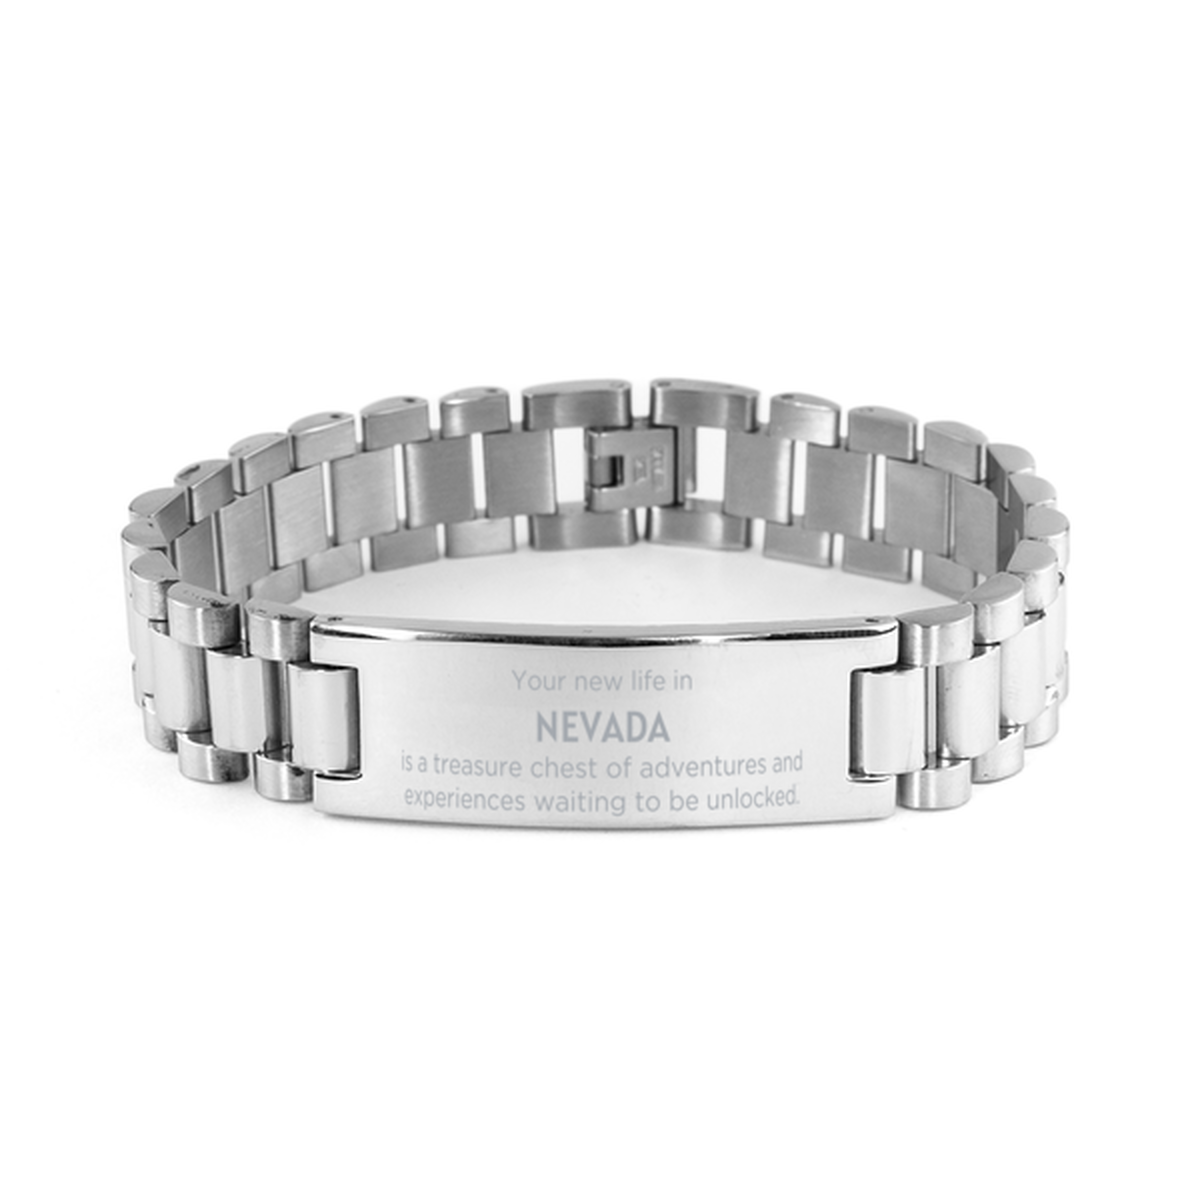 Moving to Nevada Gifts, Your new life in Nevada, Long Distance Nevada Christmas Ladder Stainless Steel Bracelet For Men, Women, Friends, Coworkers